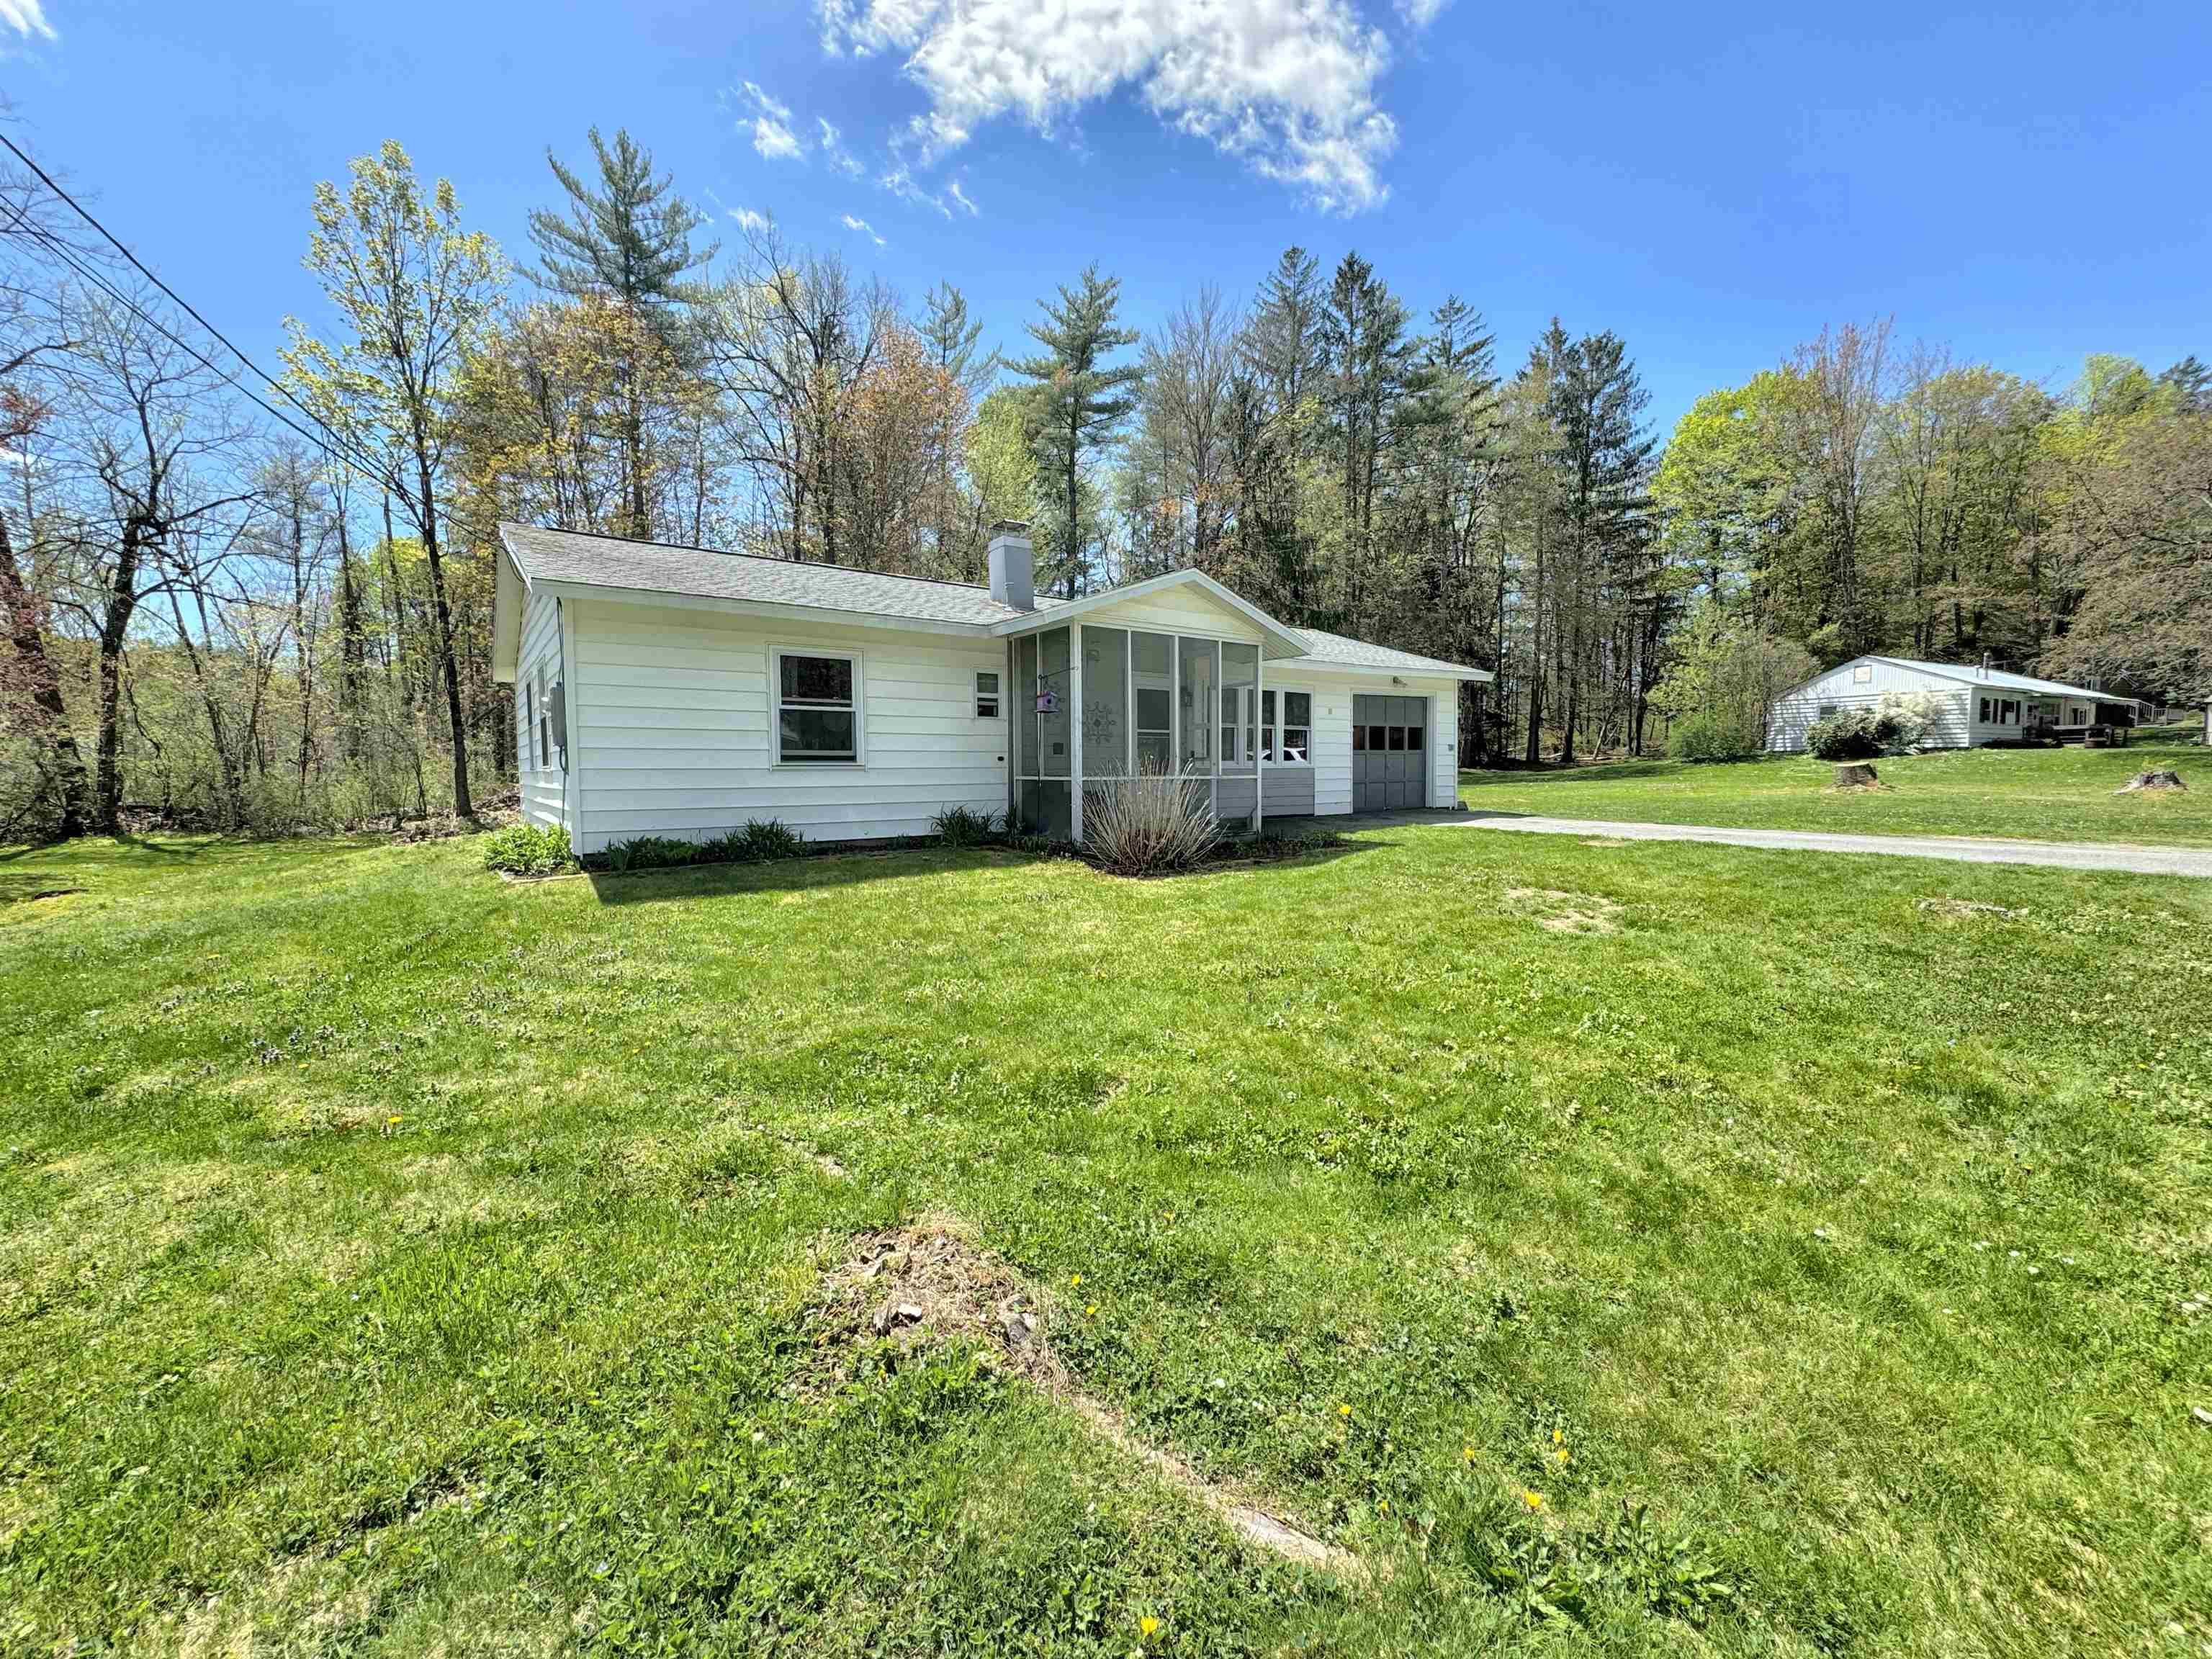 Claremont NH 03743 Home for sale $List Price is $245,000